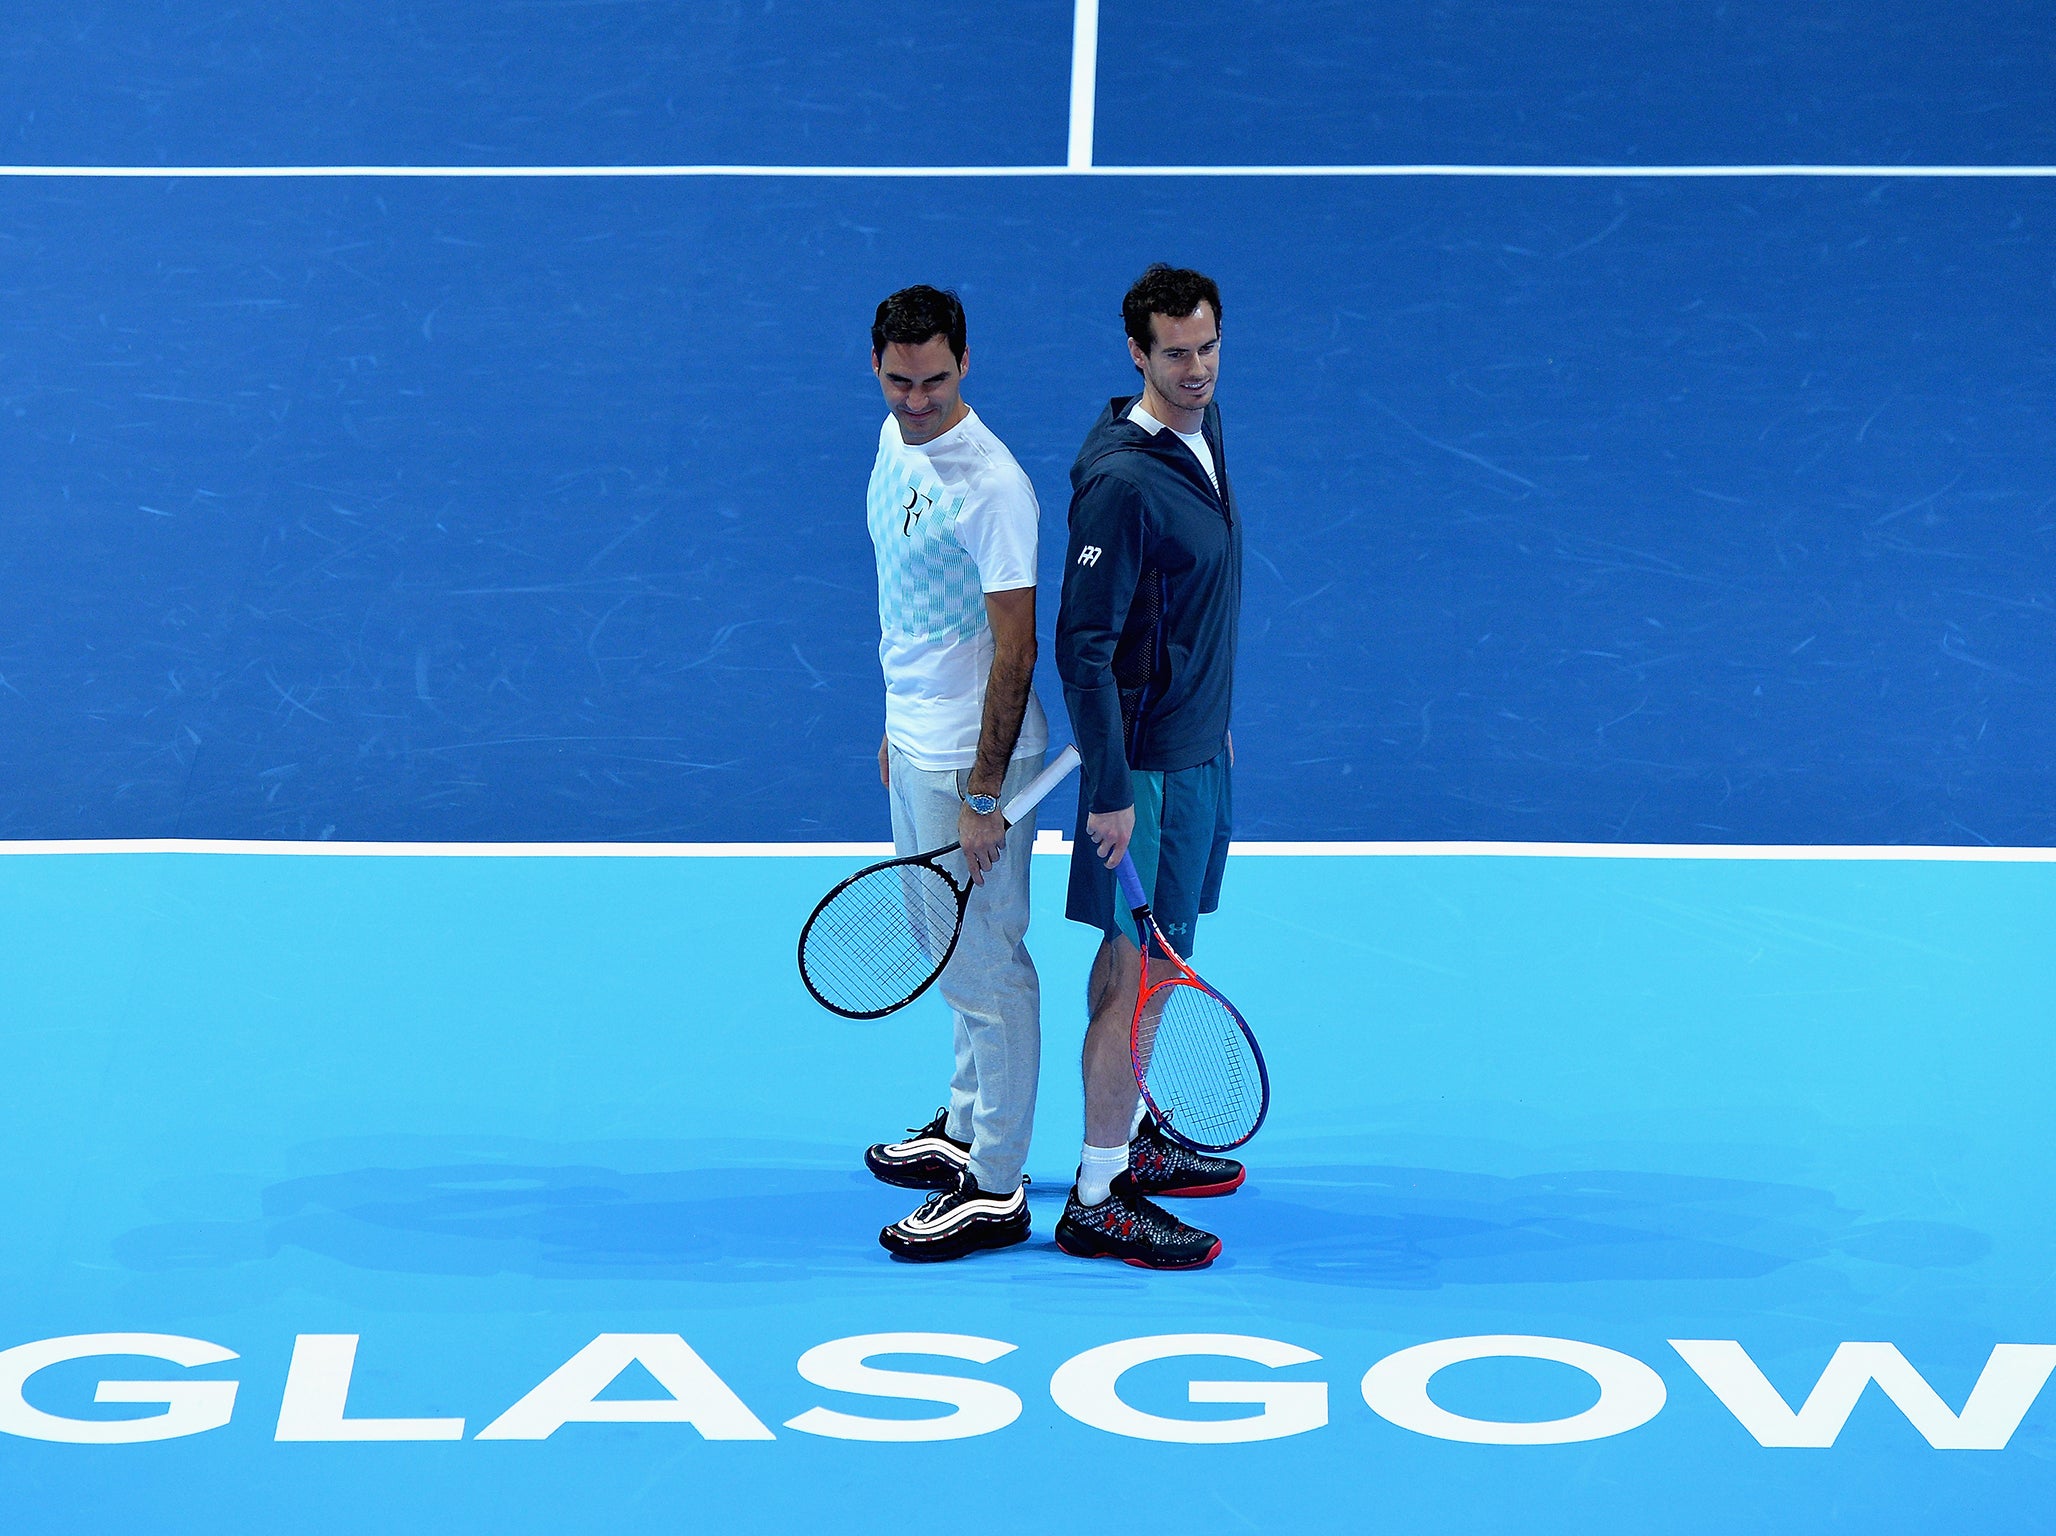 Murray and Federer took part in a charity exhibition match on Tuesday night